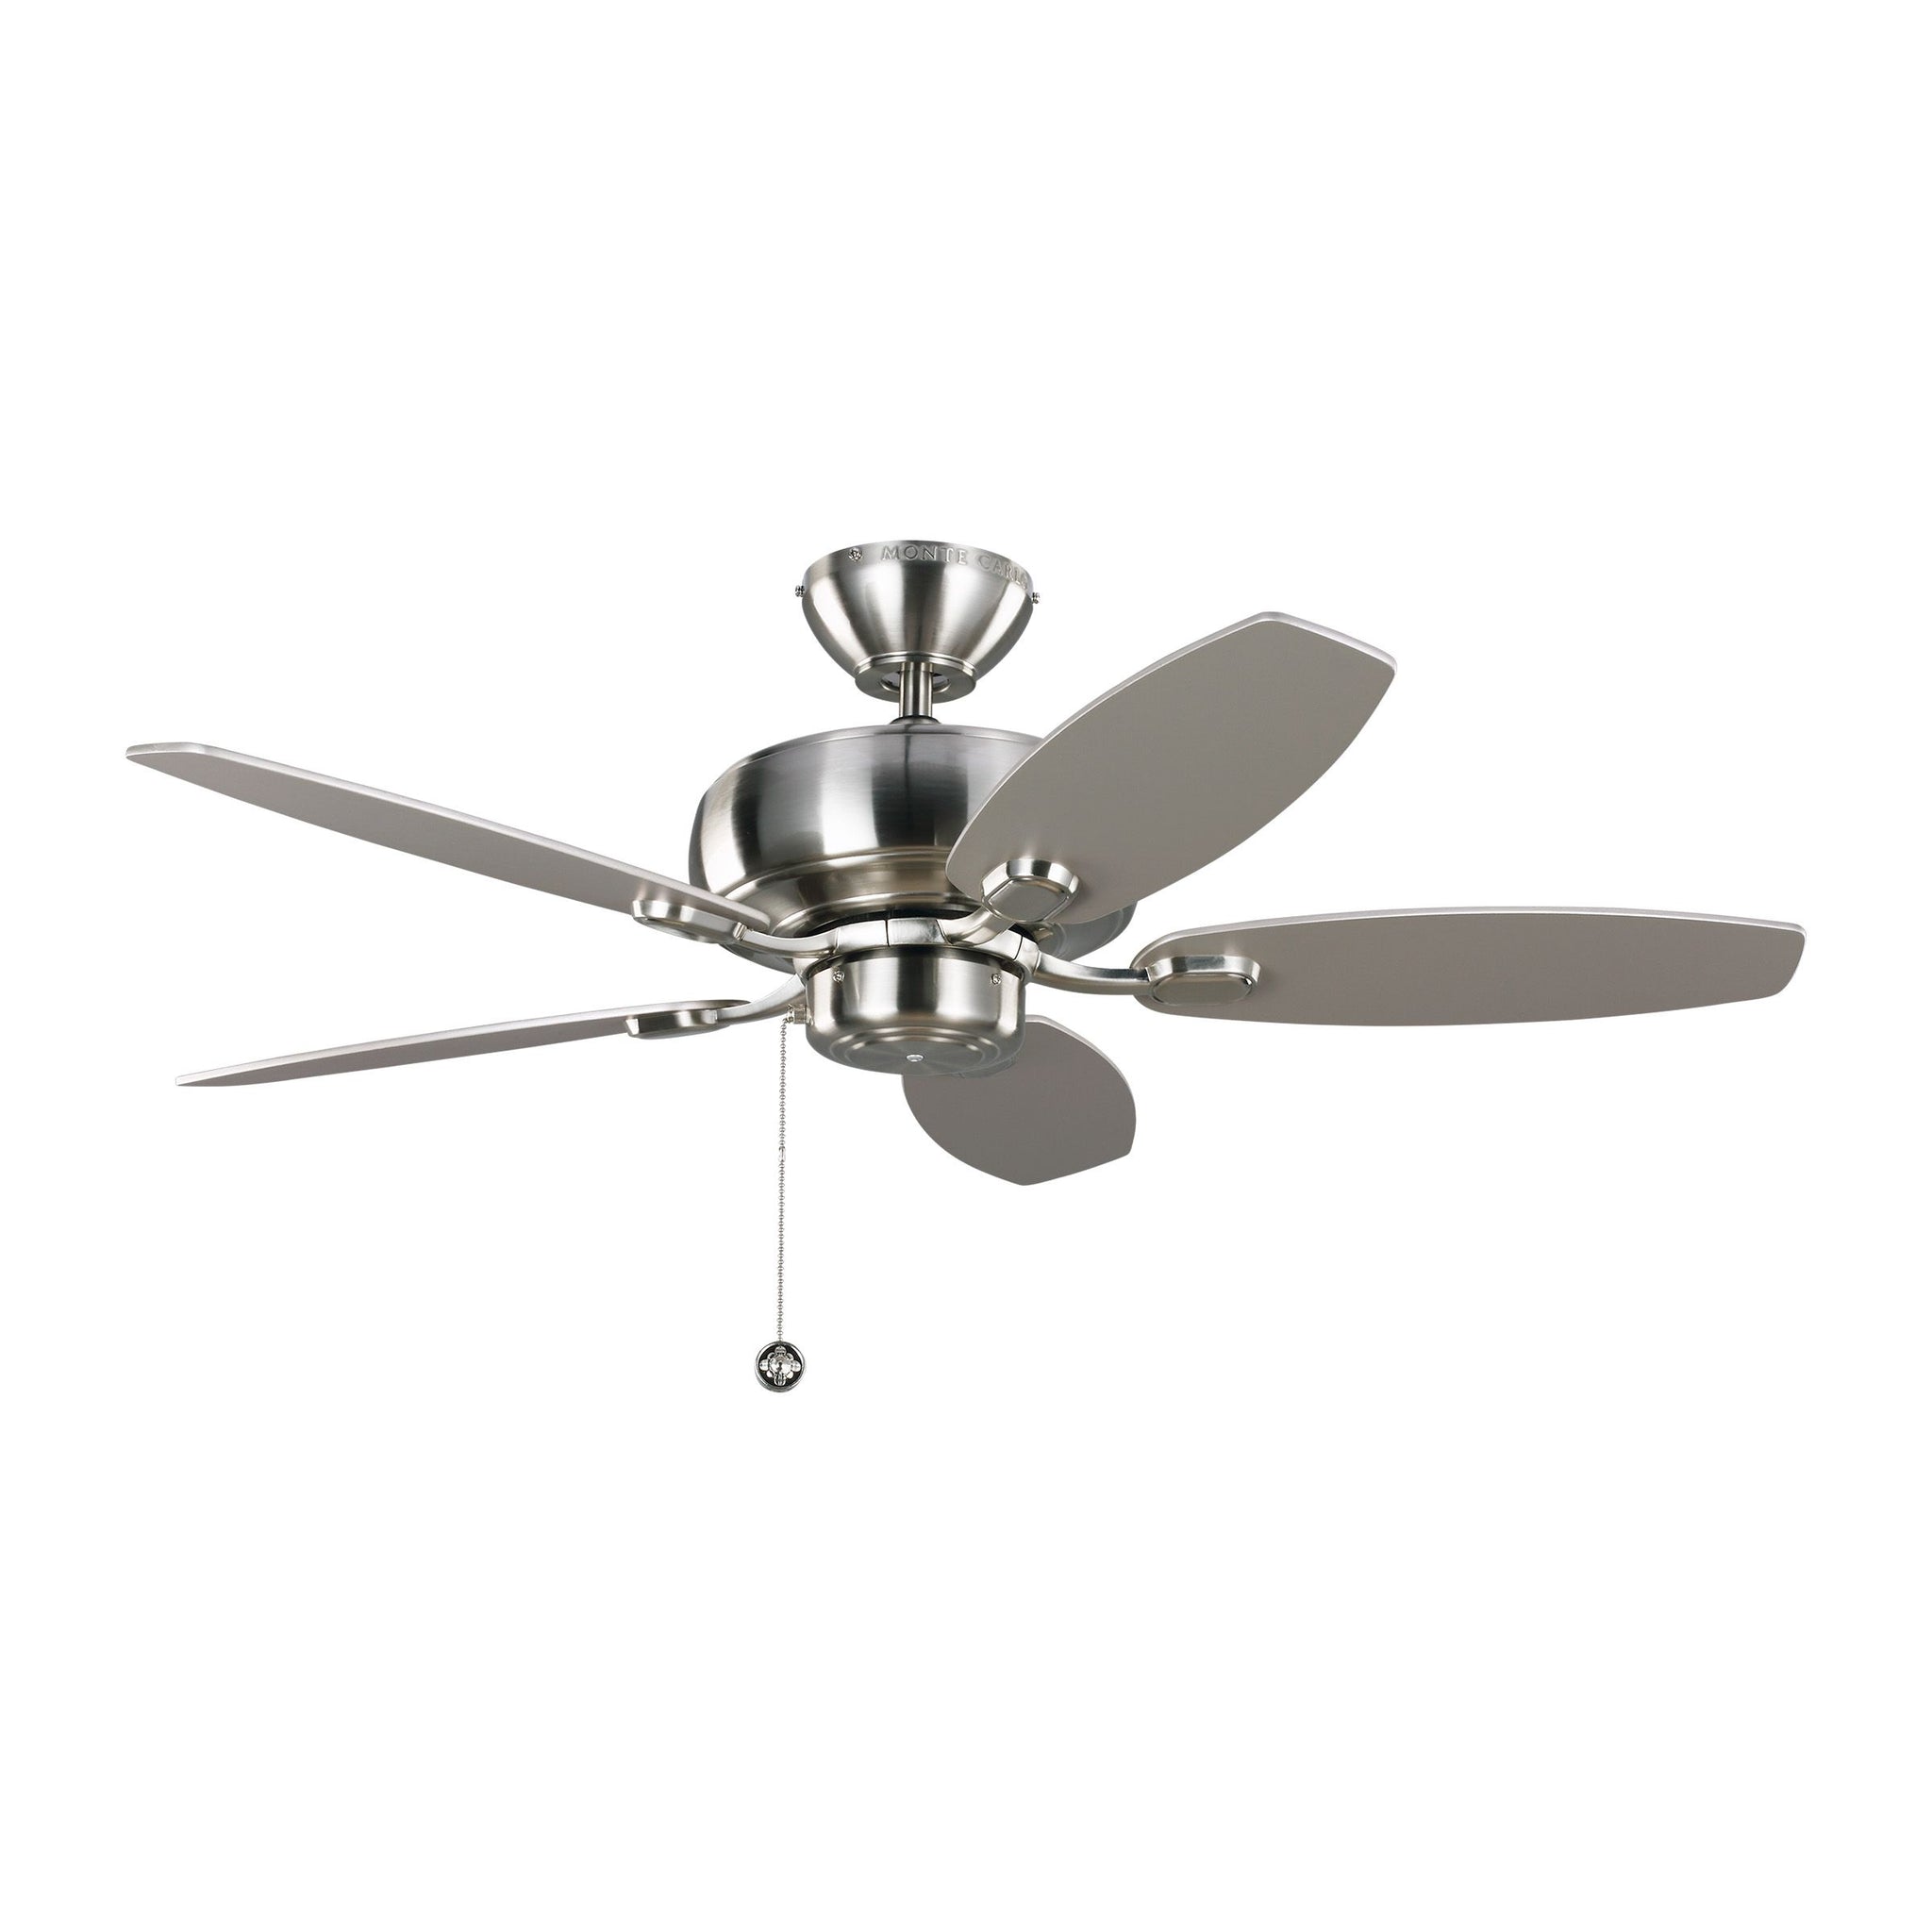 Centro Max II Ceiling Fan Brushed Steel